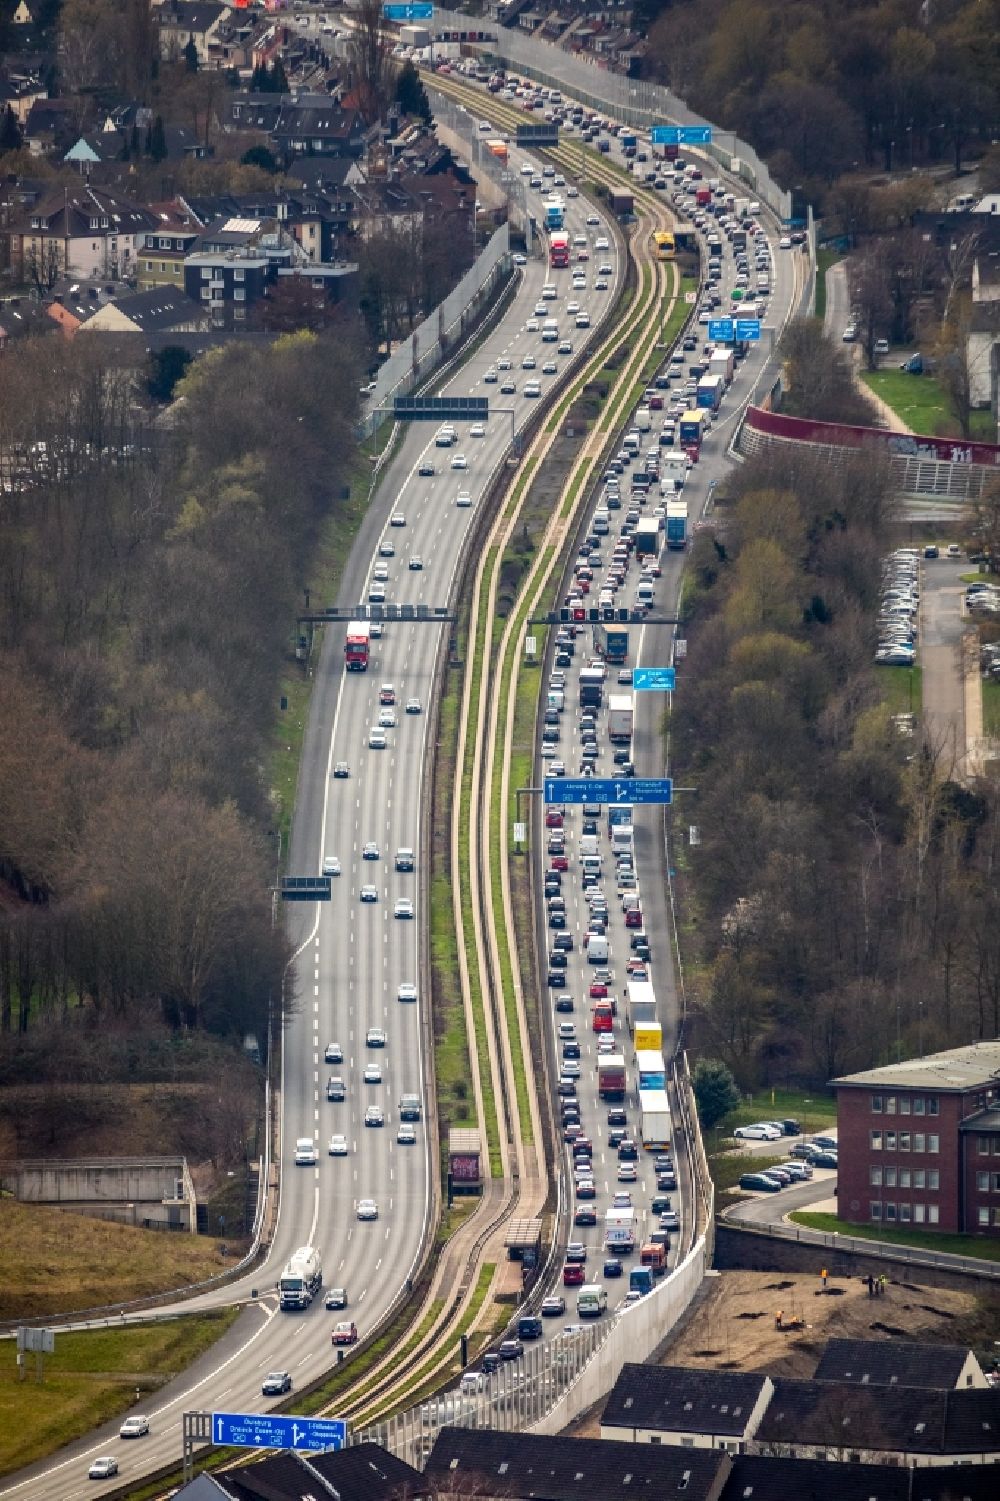 Aerial image Essen - Highway congestion along the route of the lanes BAB A40 - A52 in the district Frillendorf in Essen in the state North Rhine-Westphalia, Germany